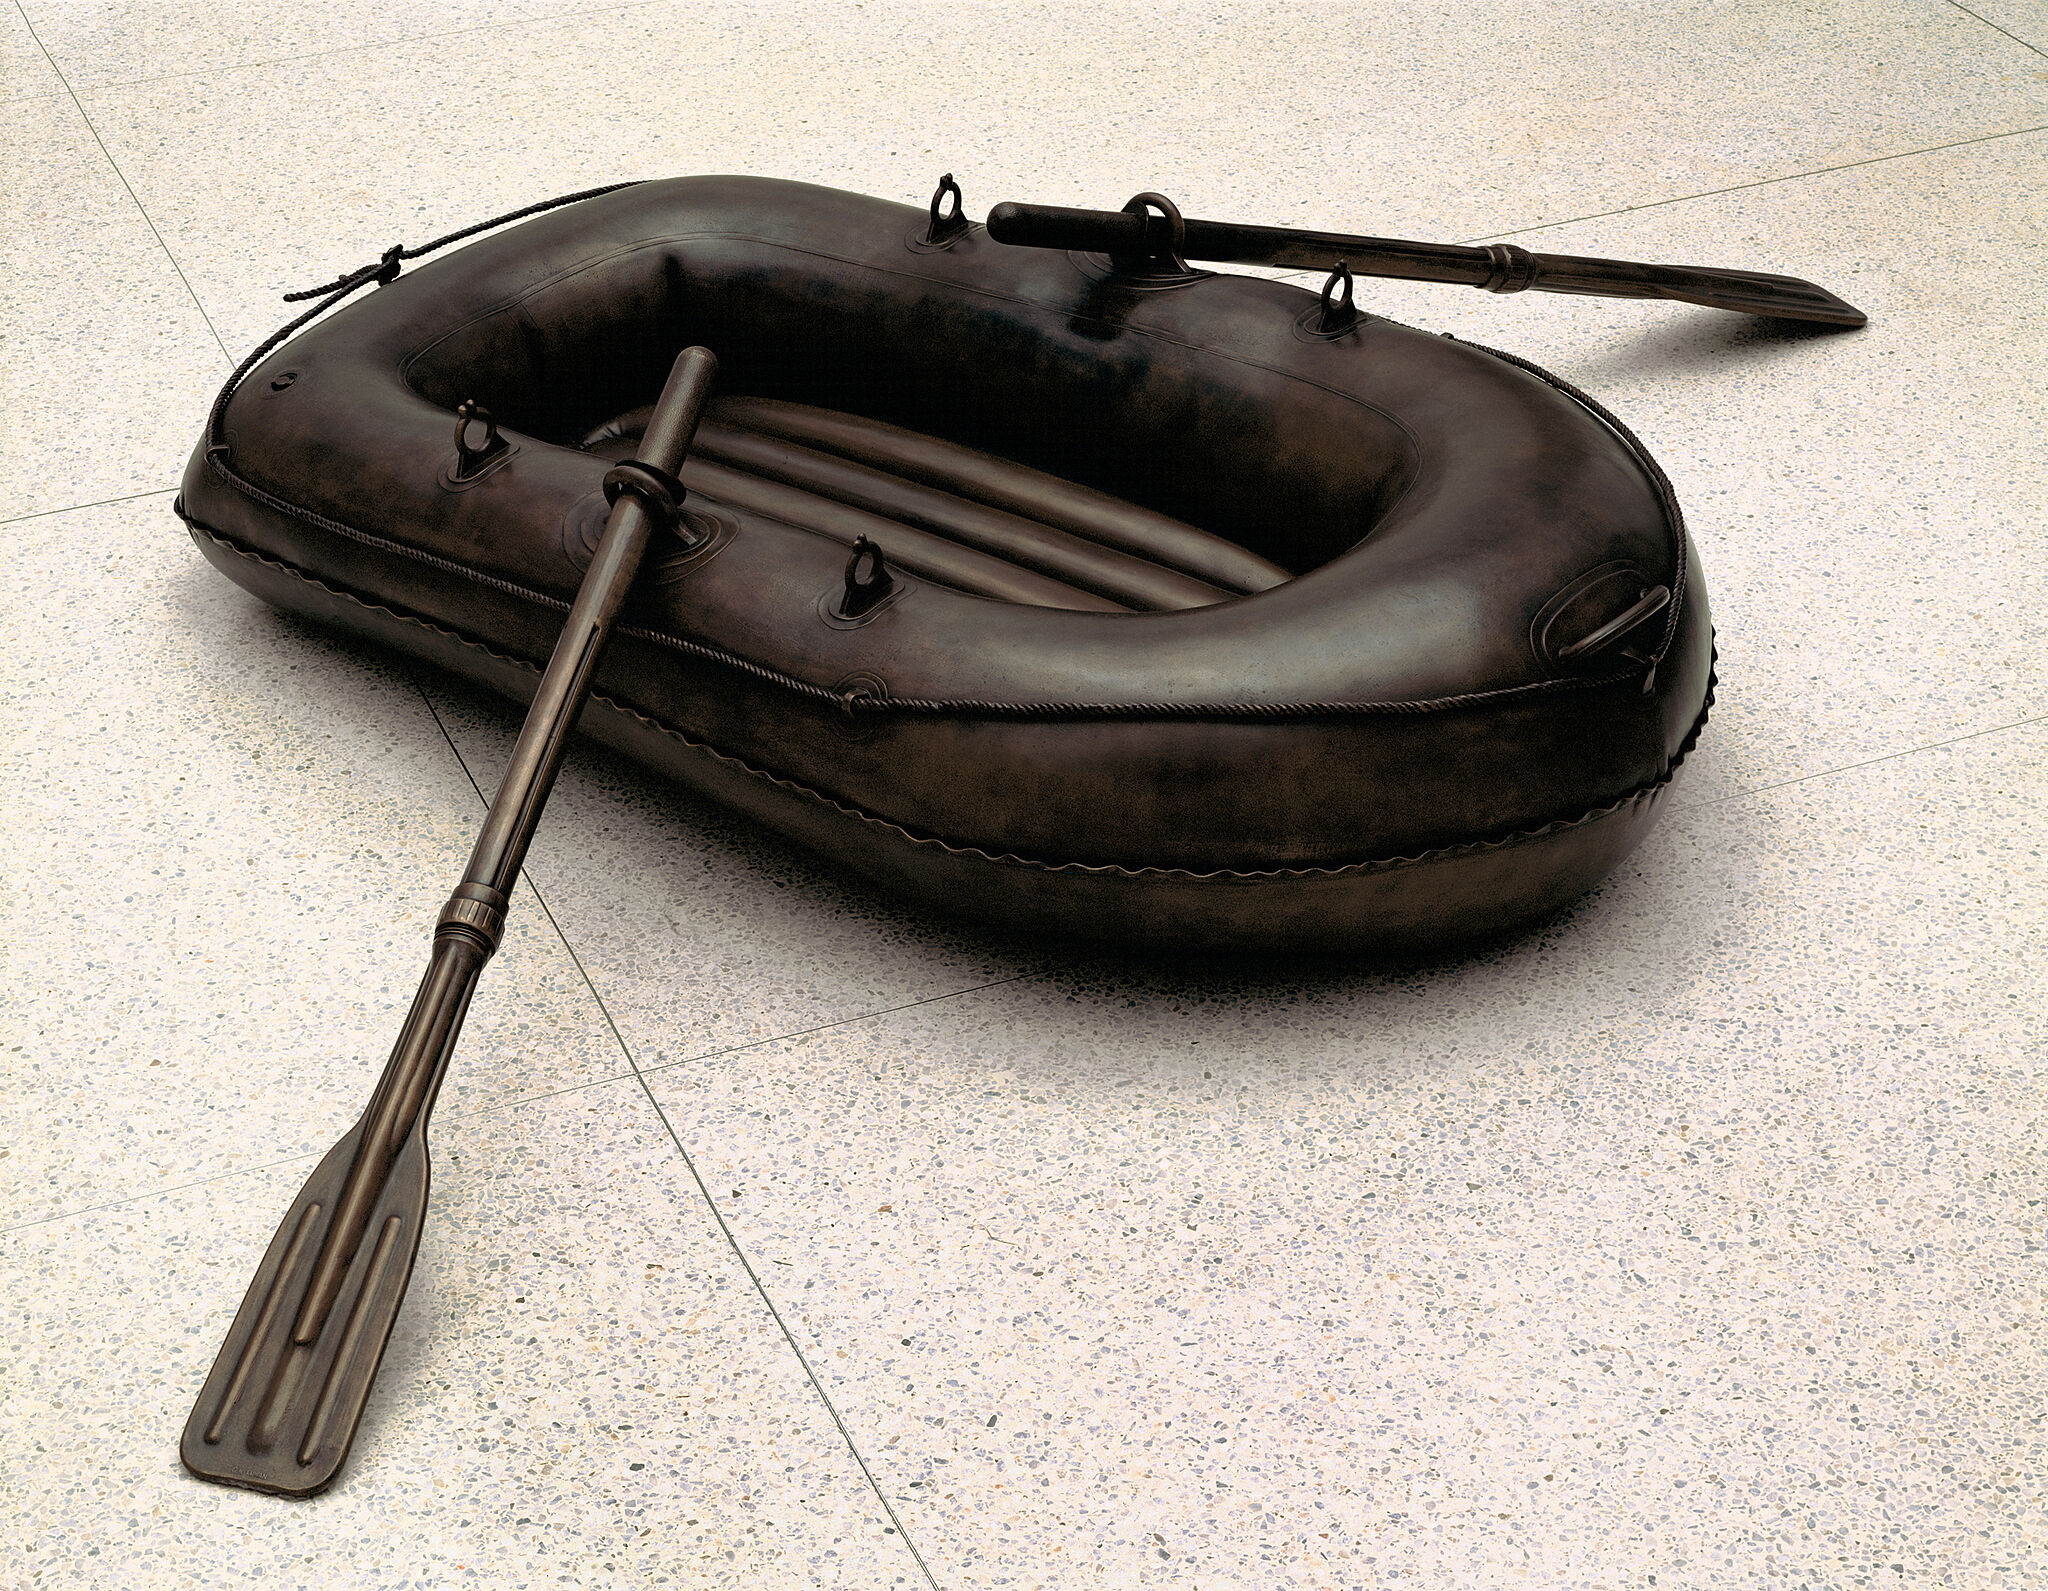 A sculpture of a black lifeboat with two oars on the ground.